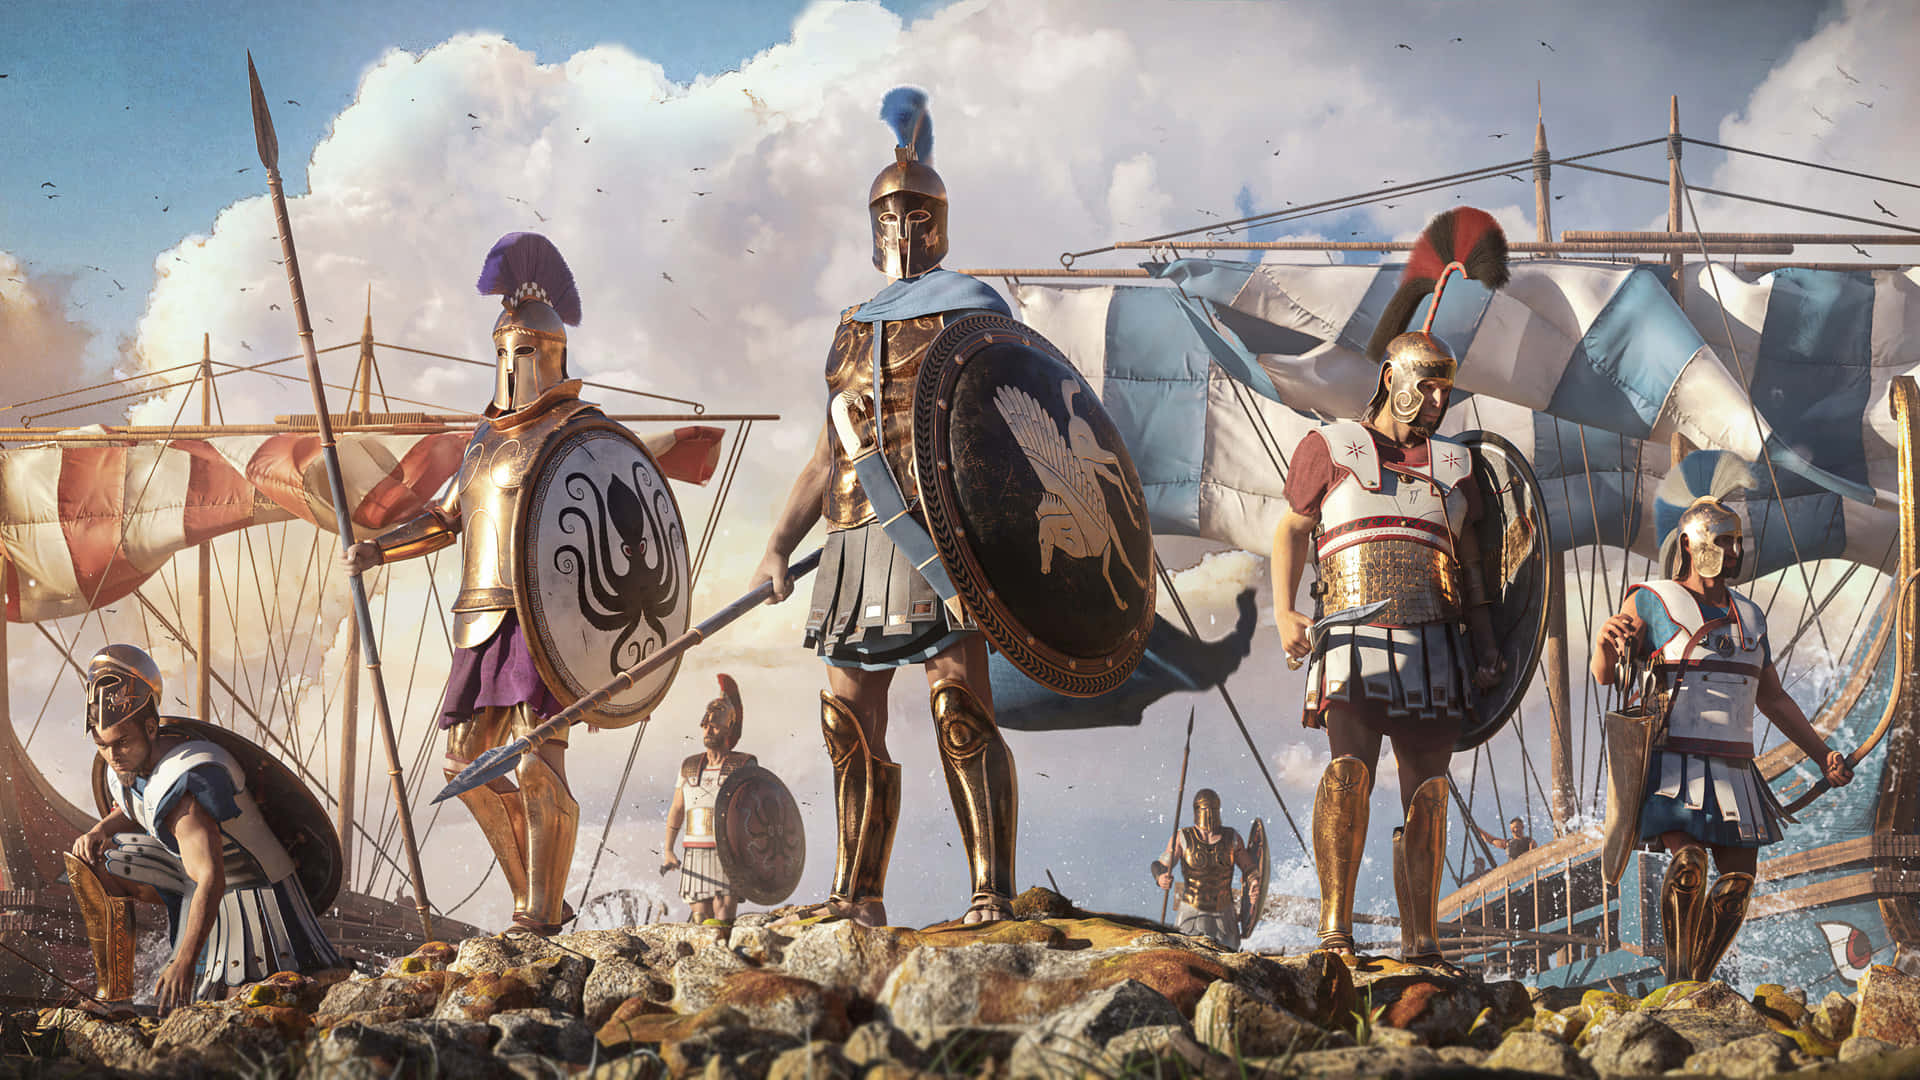 A Group Of People In Armor And Shields Standing On A Rock